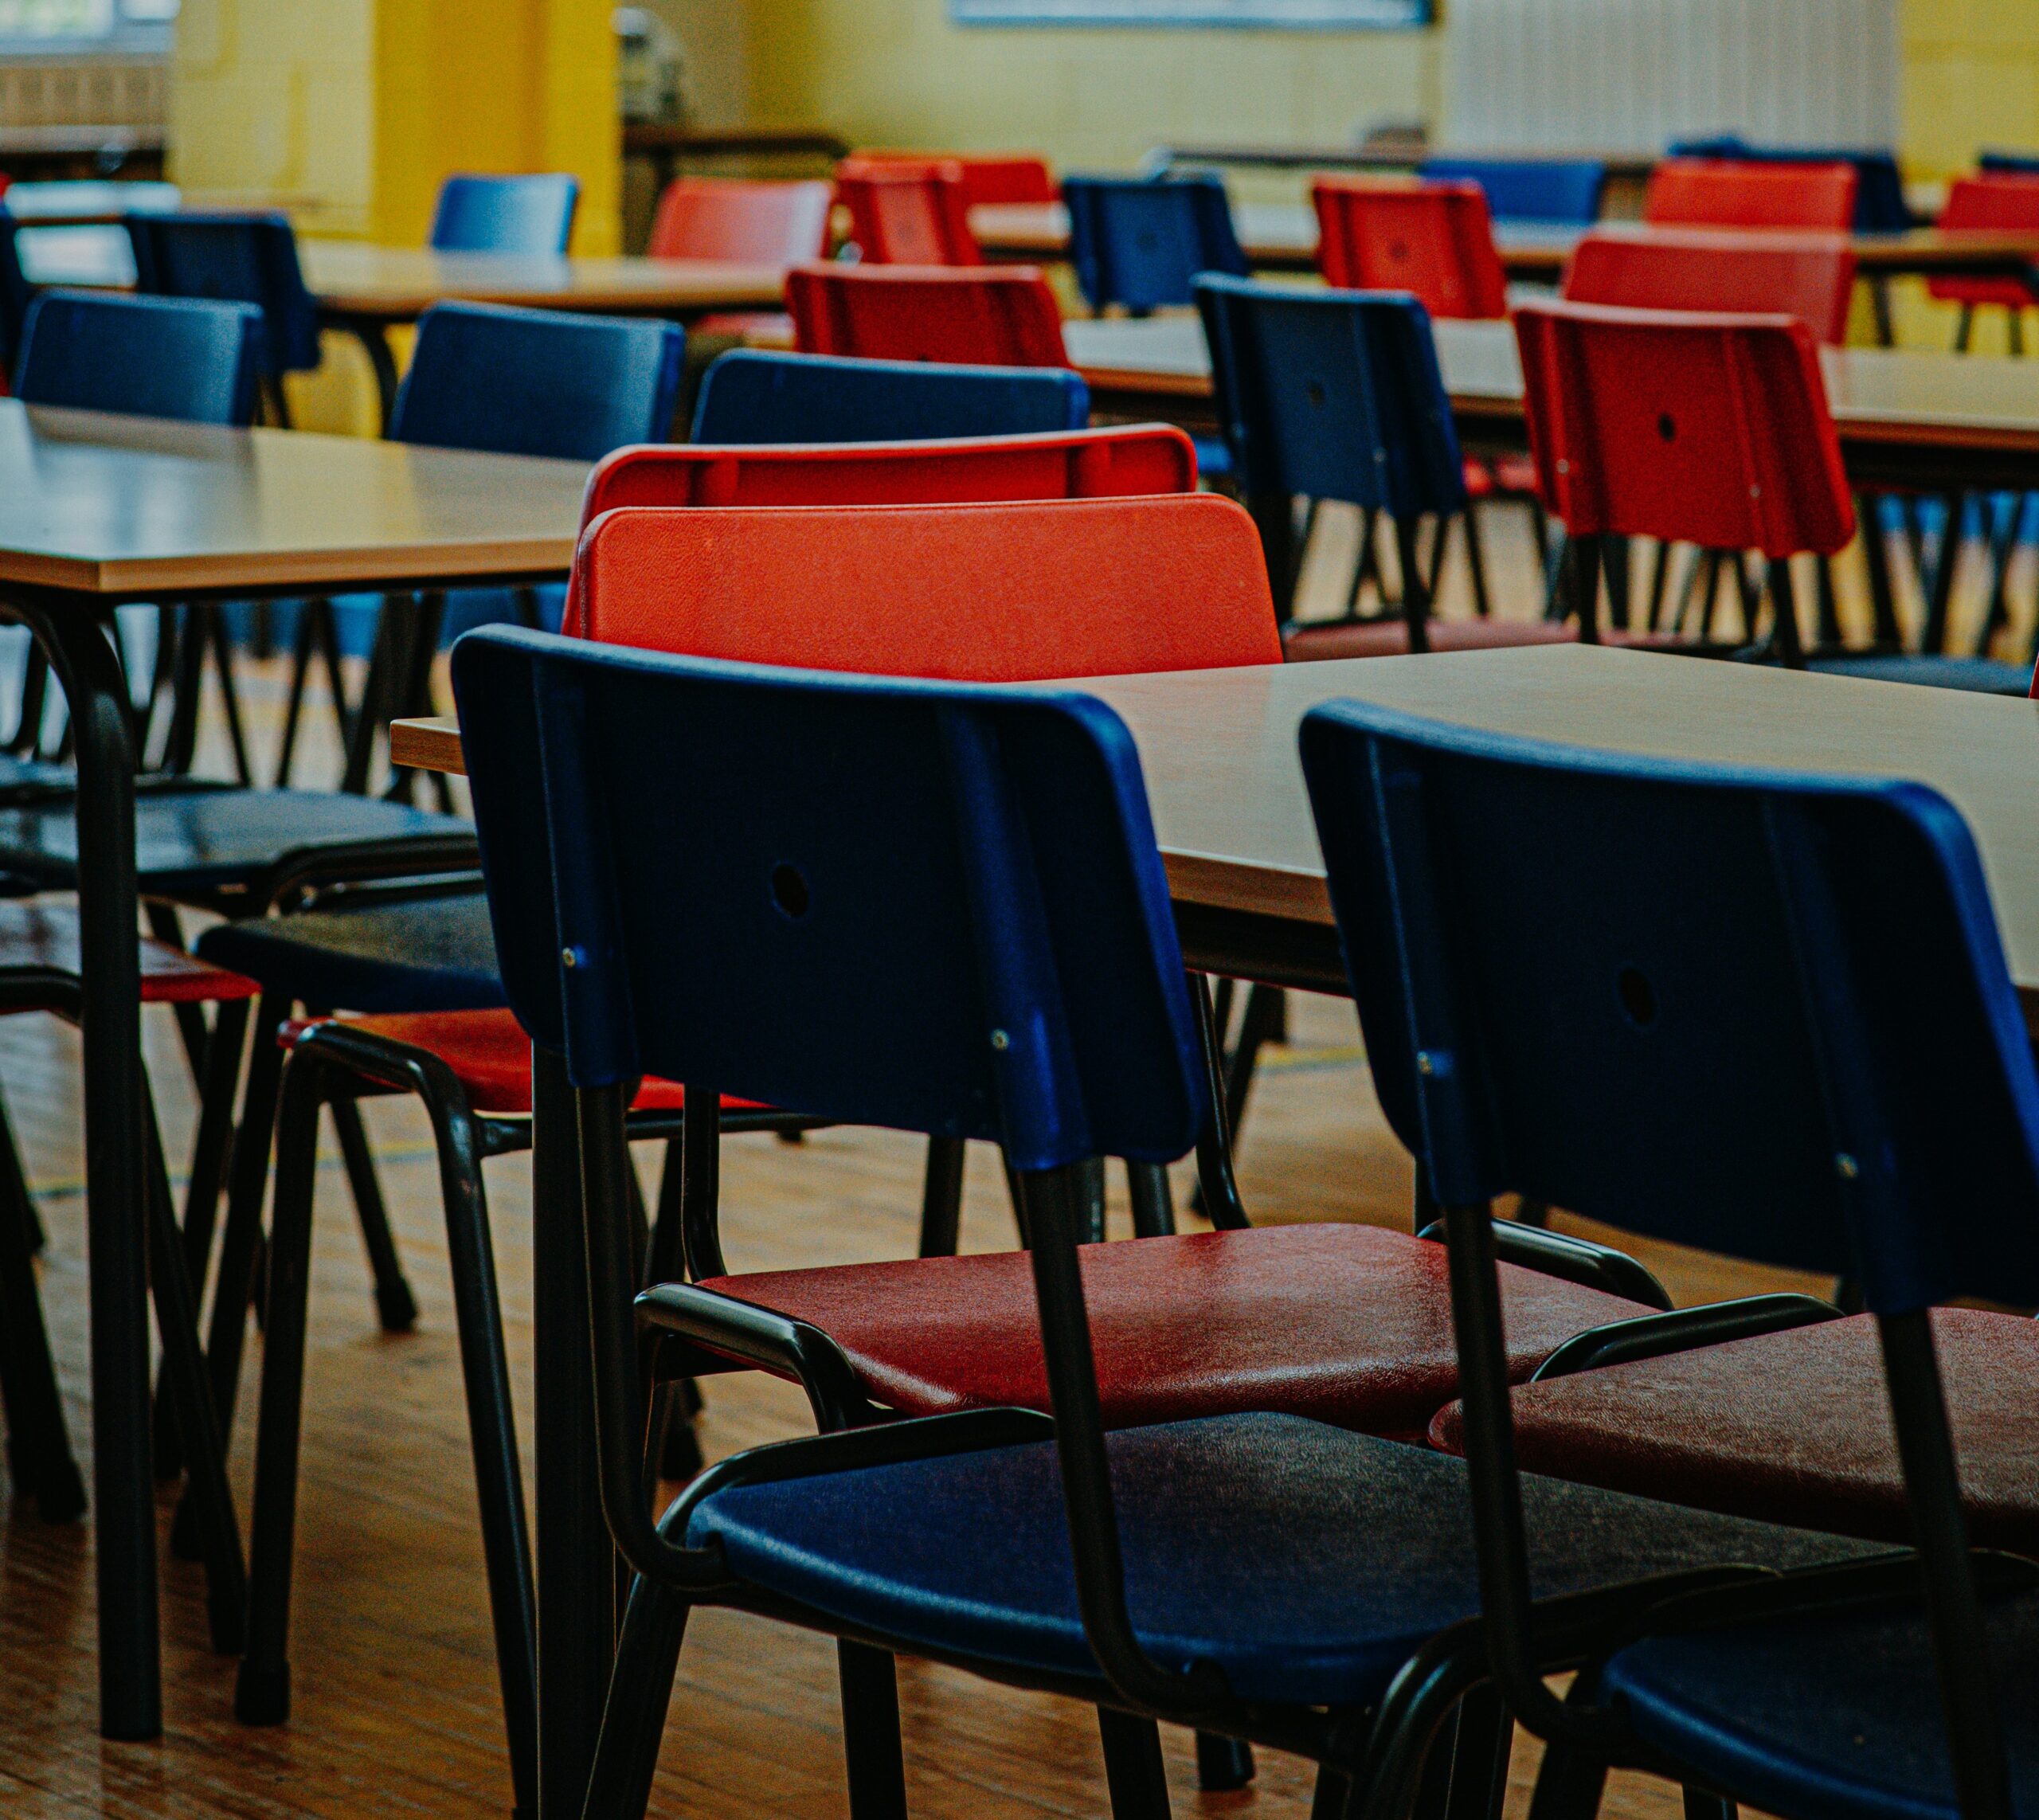 Colourful chairs in a classroom